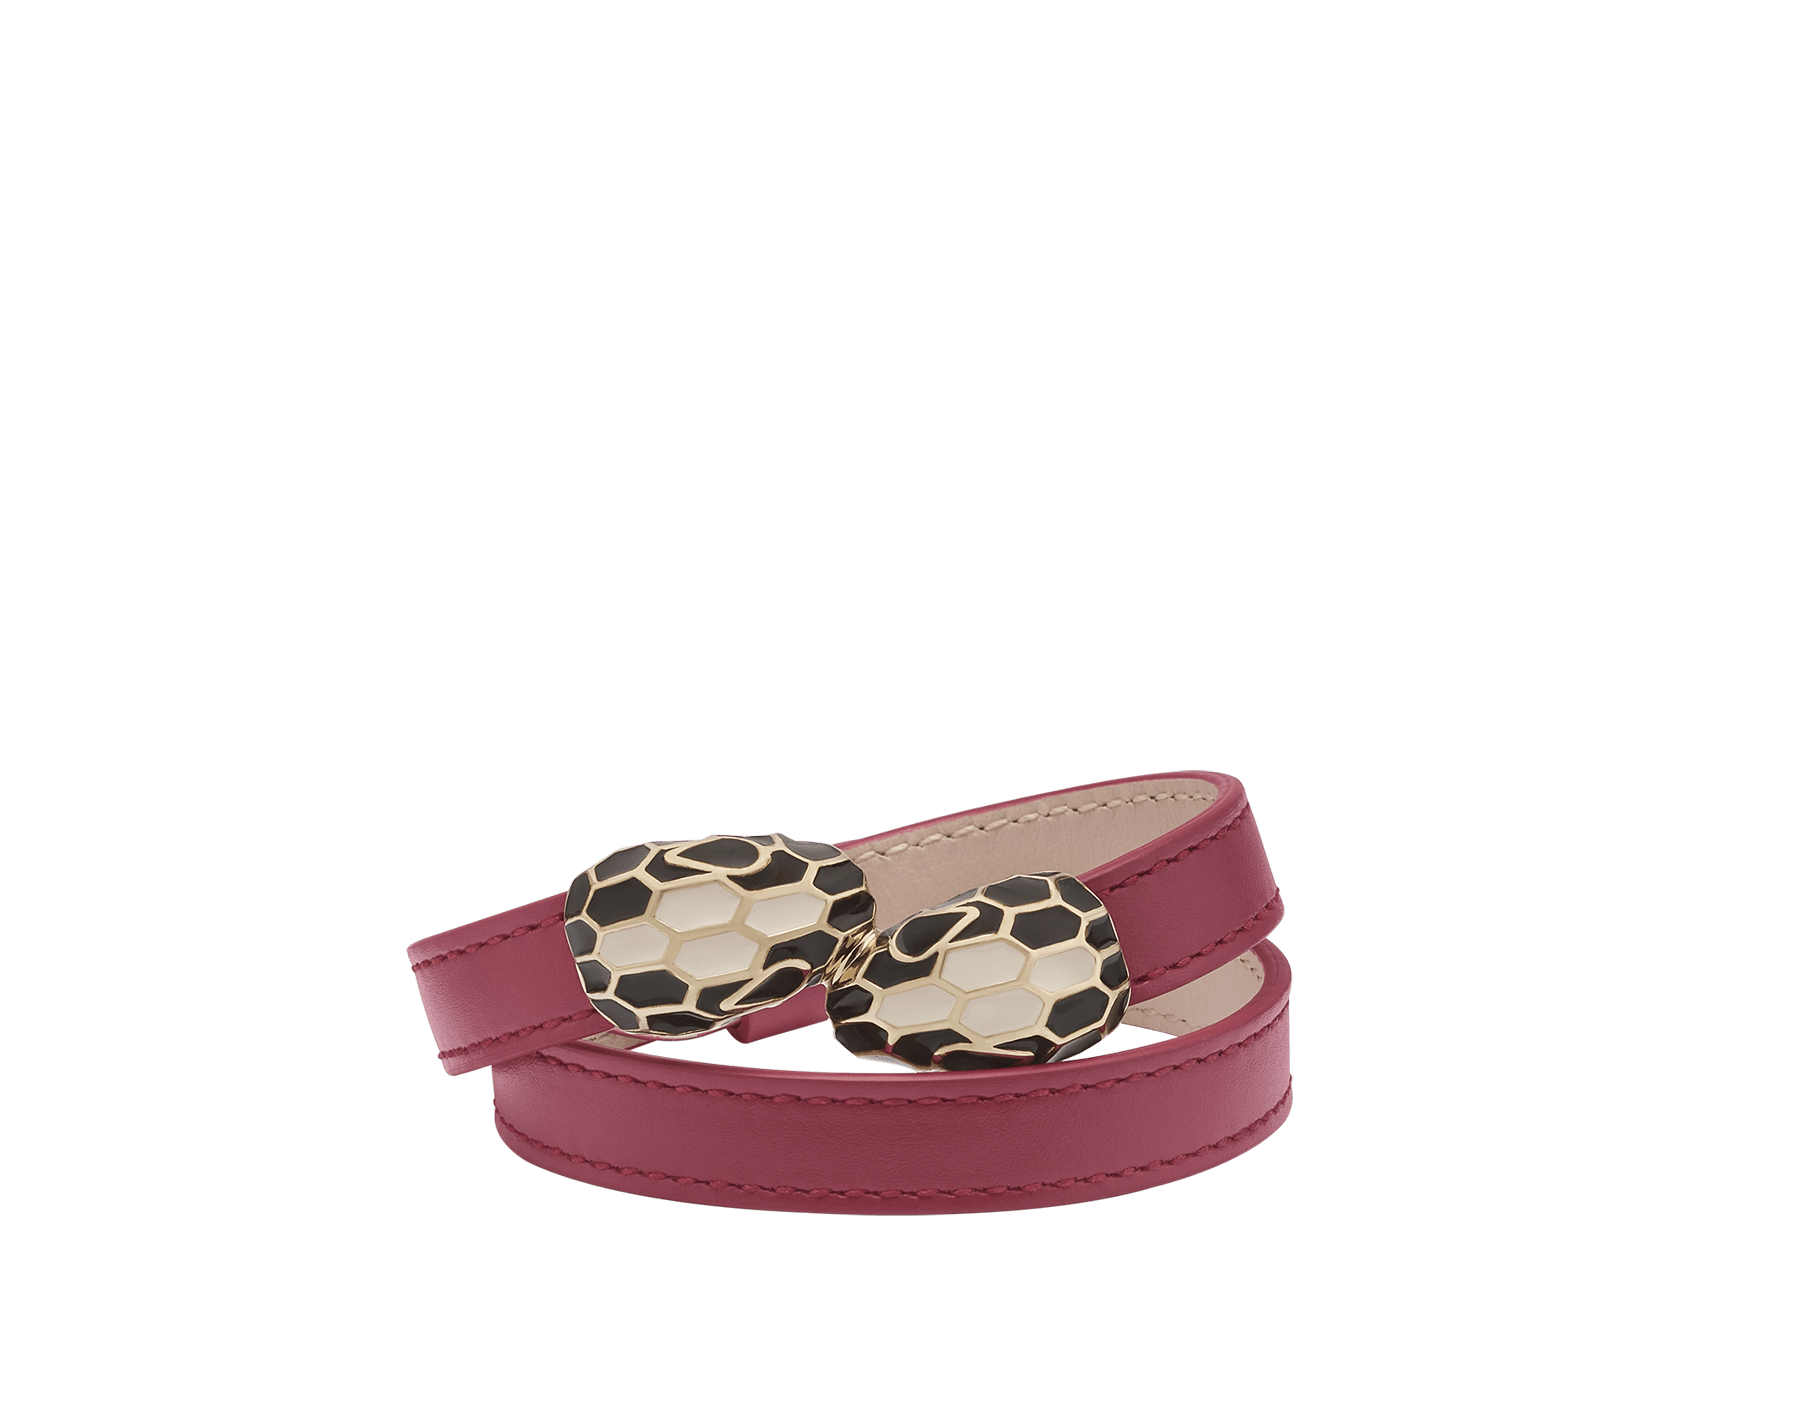 Serpenti Forever multi-coil bracelet in anemone spinel pinkish red calf leather. Single-rivet contraire snakehead closure in light gold-plated brass embellished with black and white agate enamel scales and black enamel eyes. MCSerp-CL-AS image 1